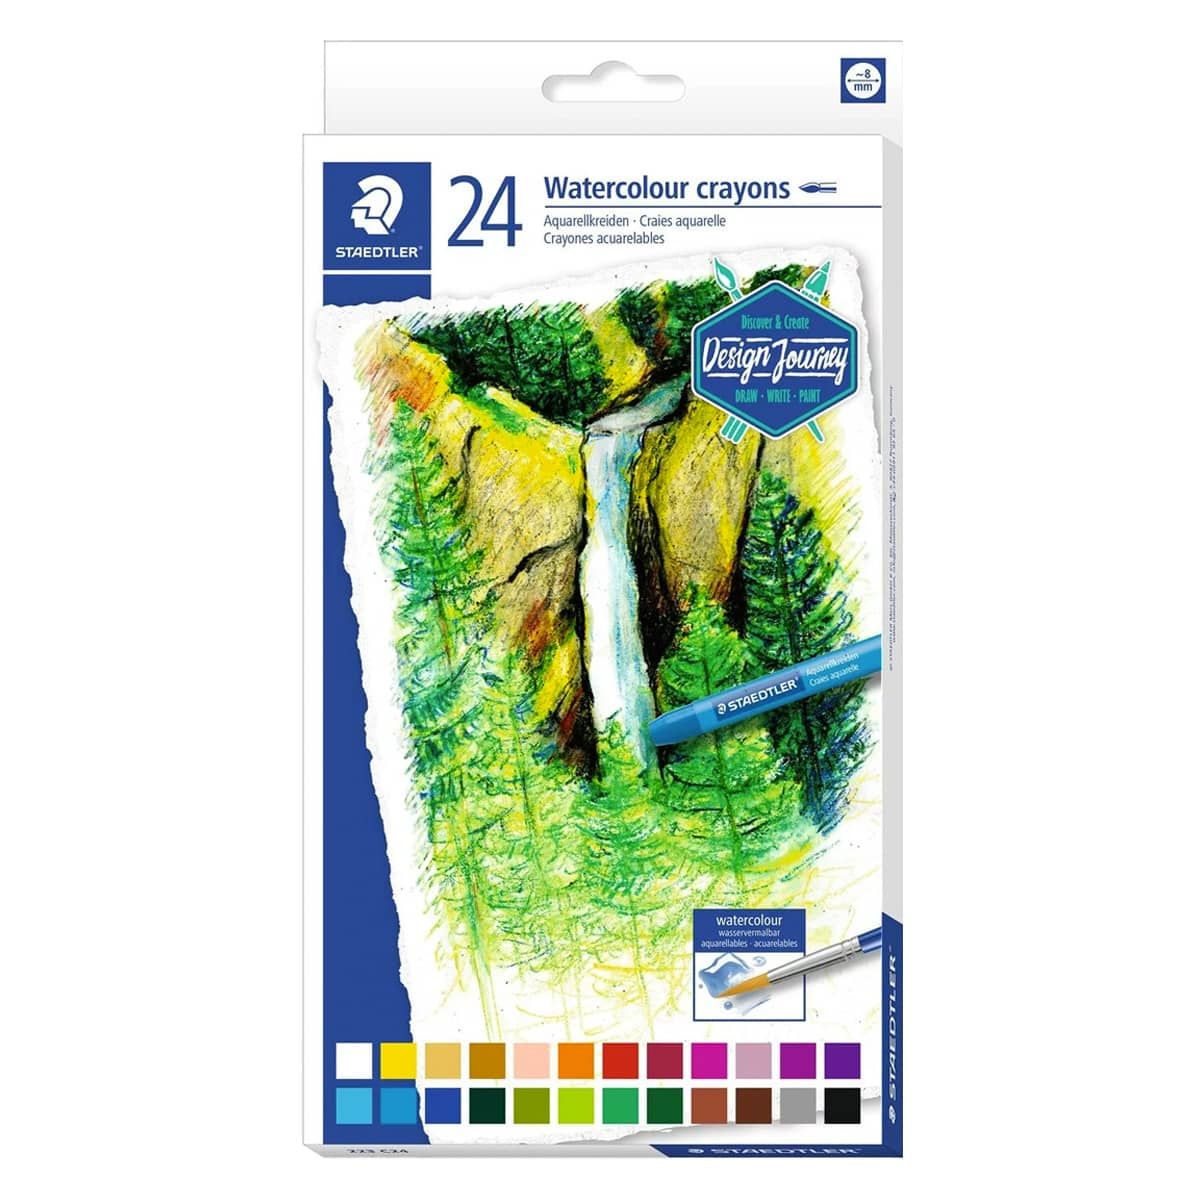 STAEDTLER Watercolor Crayons - Assorted Colours Set of 24 | Jerry's ...